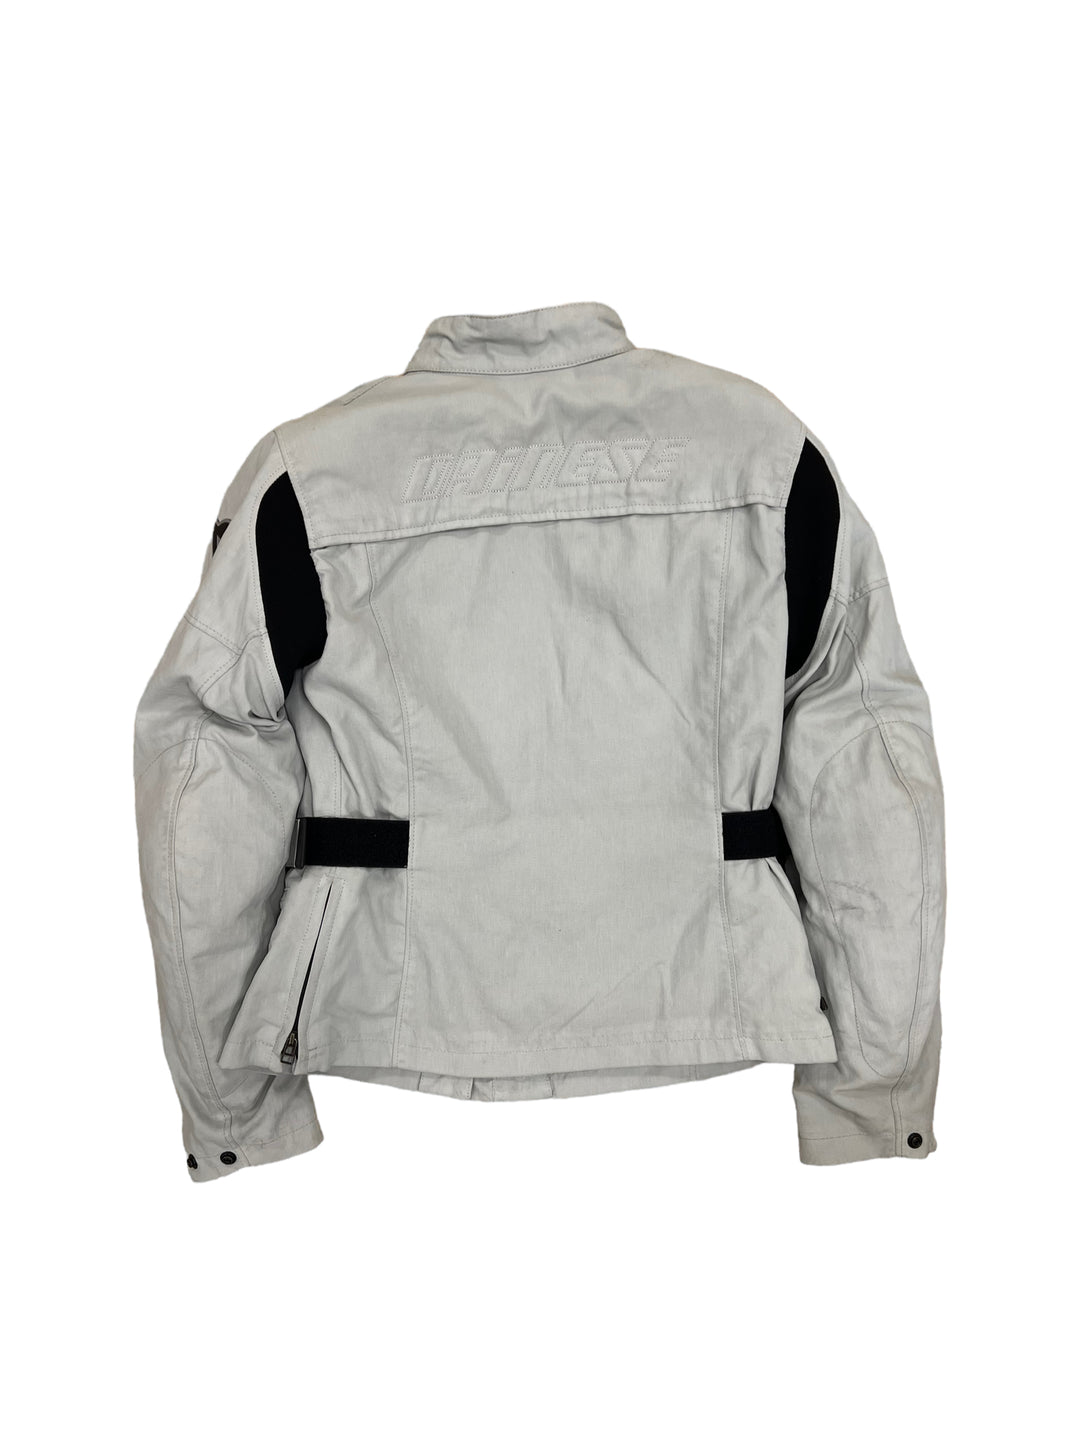 Dainese Motorcycle Equipment Jacket Women’s Small